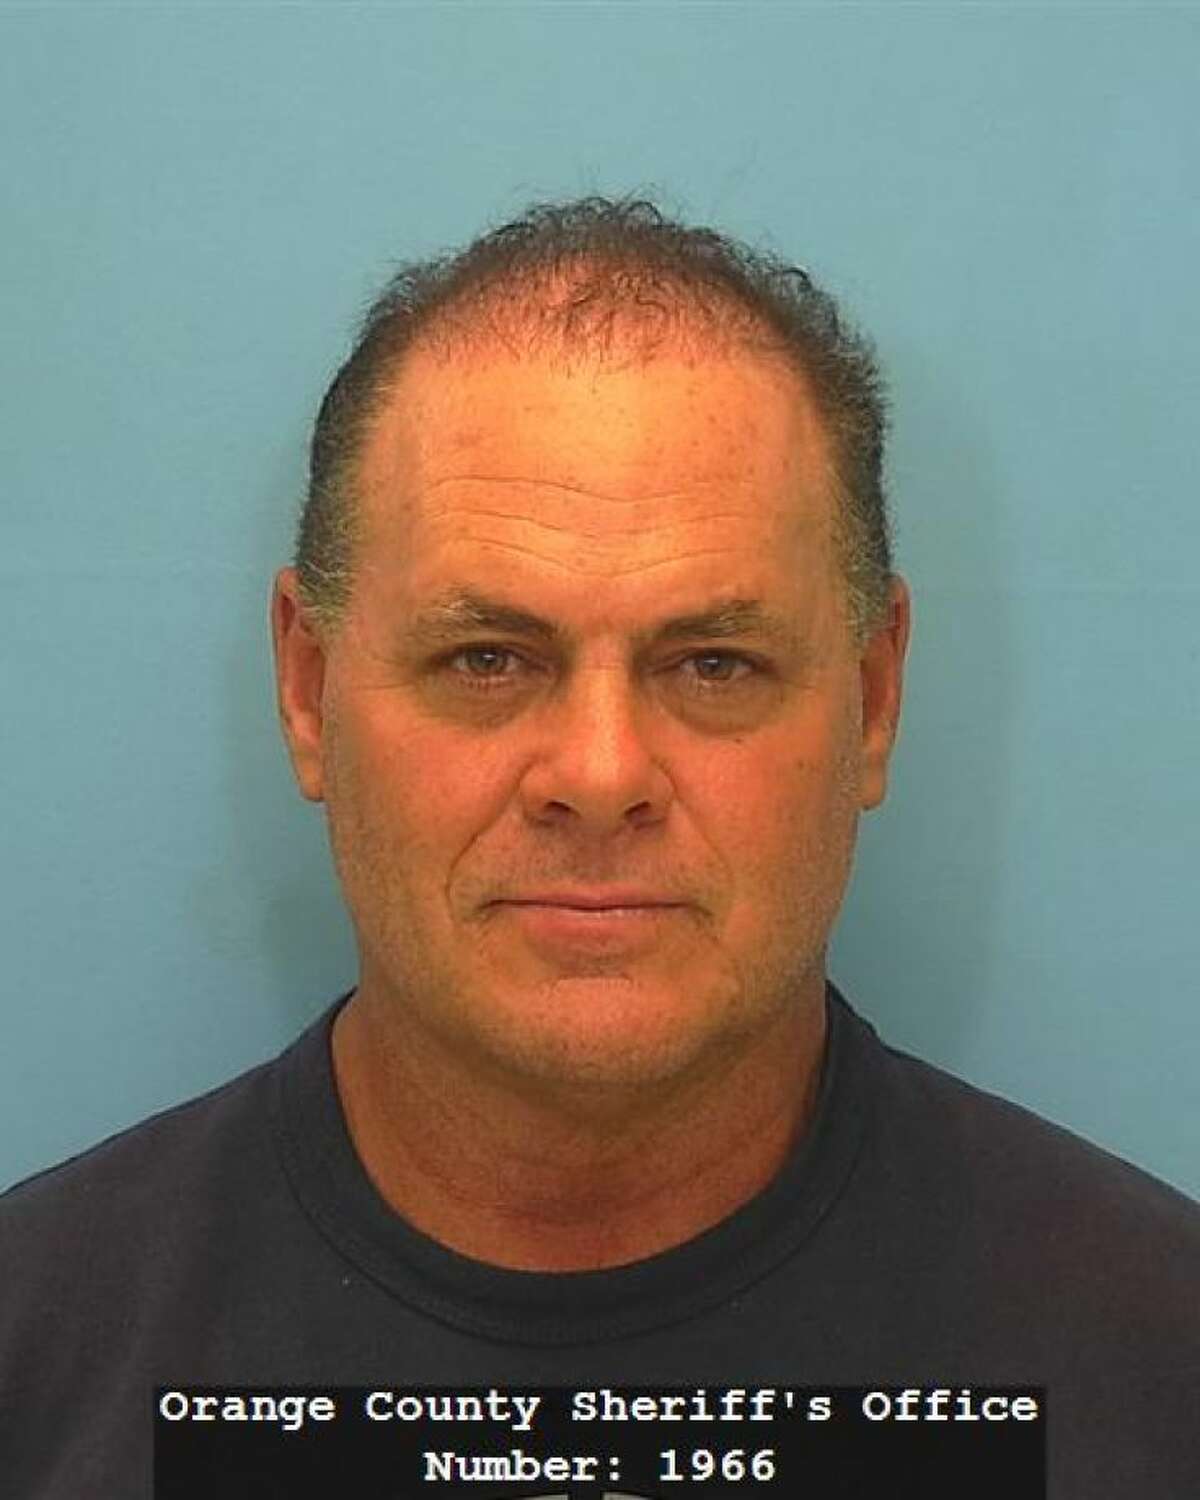 Carl Broussard, 53, faces two second-degree felony charges for allegedly leaving the scene of a fatal auto pedestrian accident that killed a woman and her 6-year-old daughter.